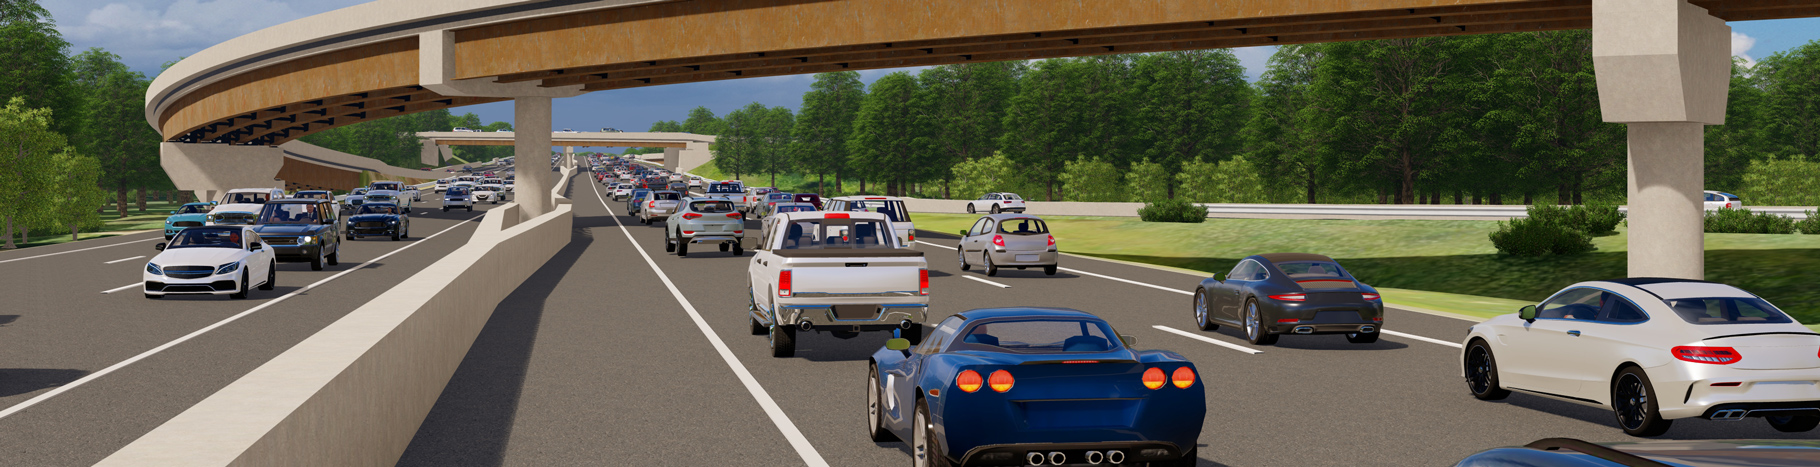 A rendering of automobiles traveling under a busy roadway overpass